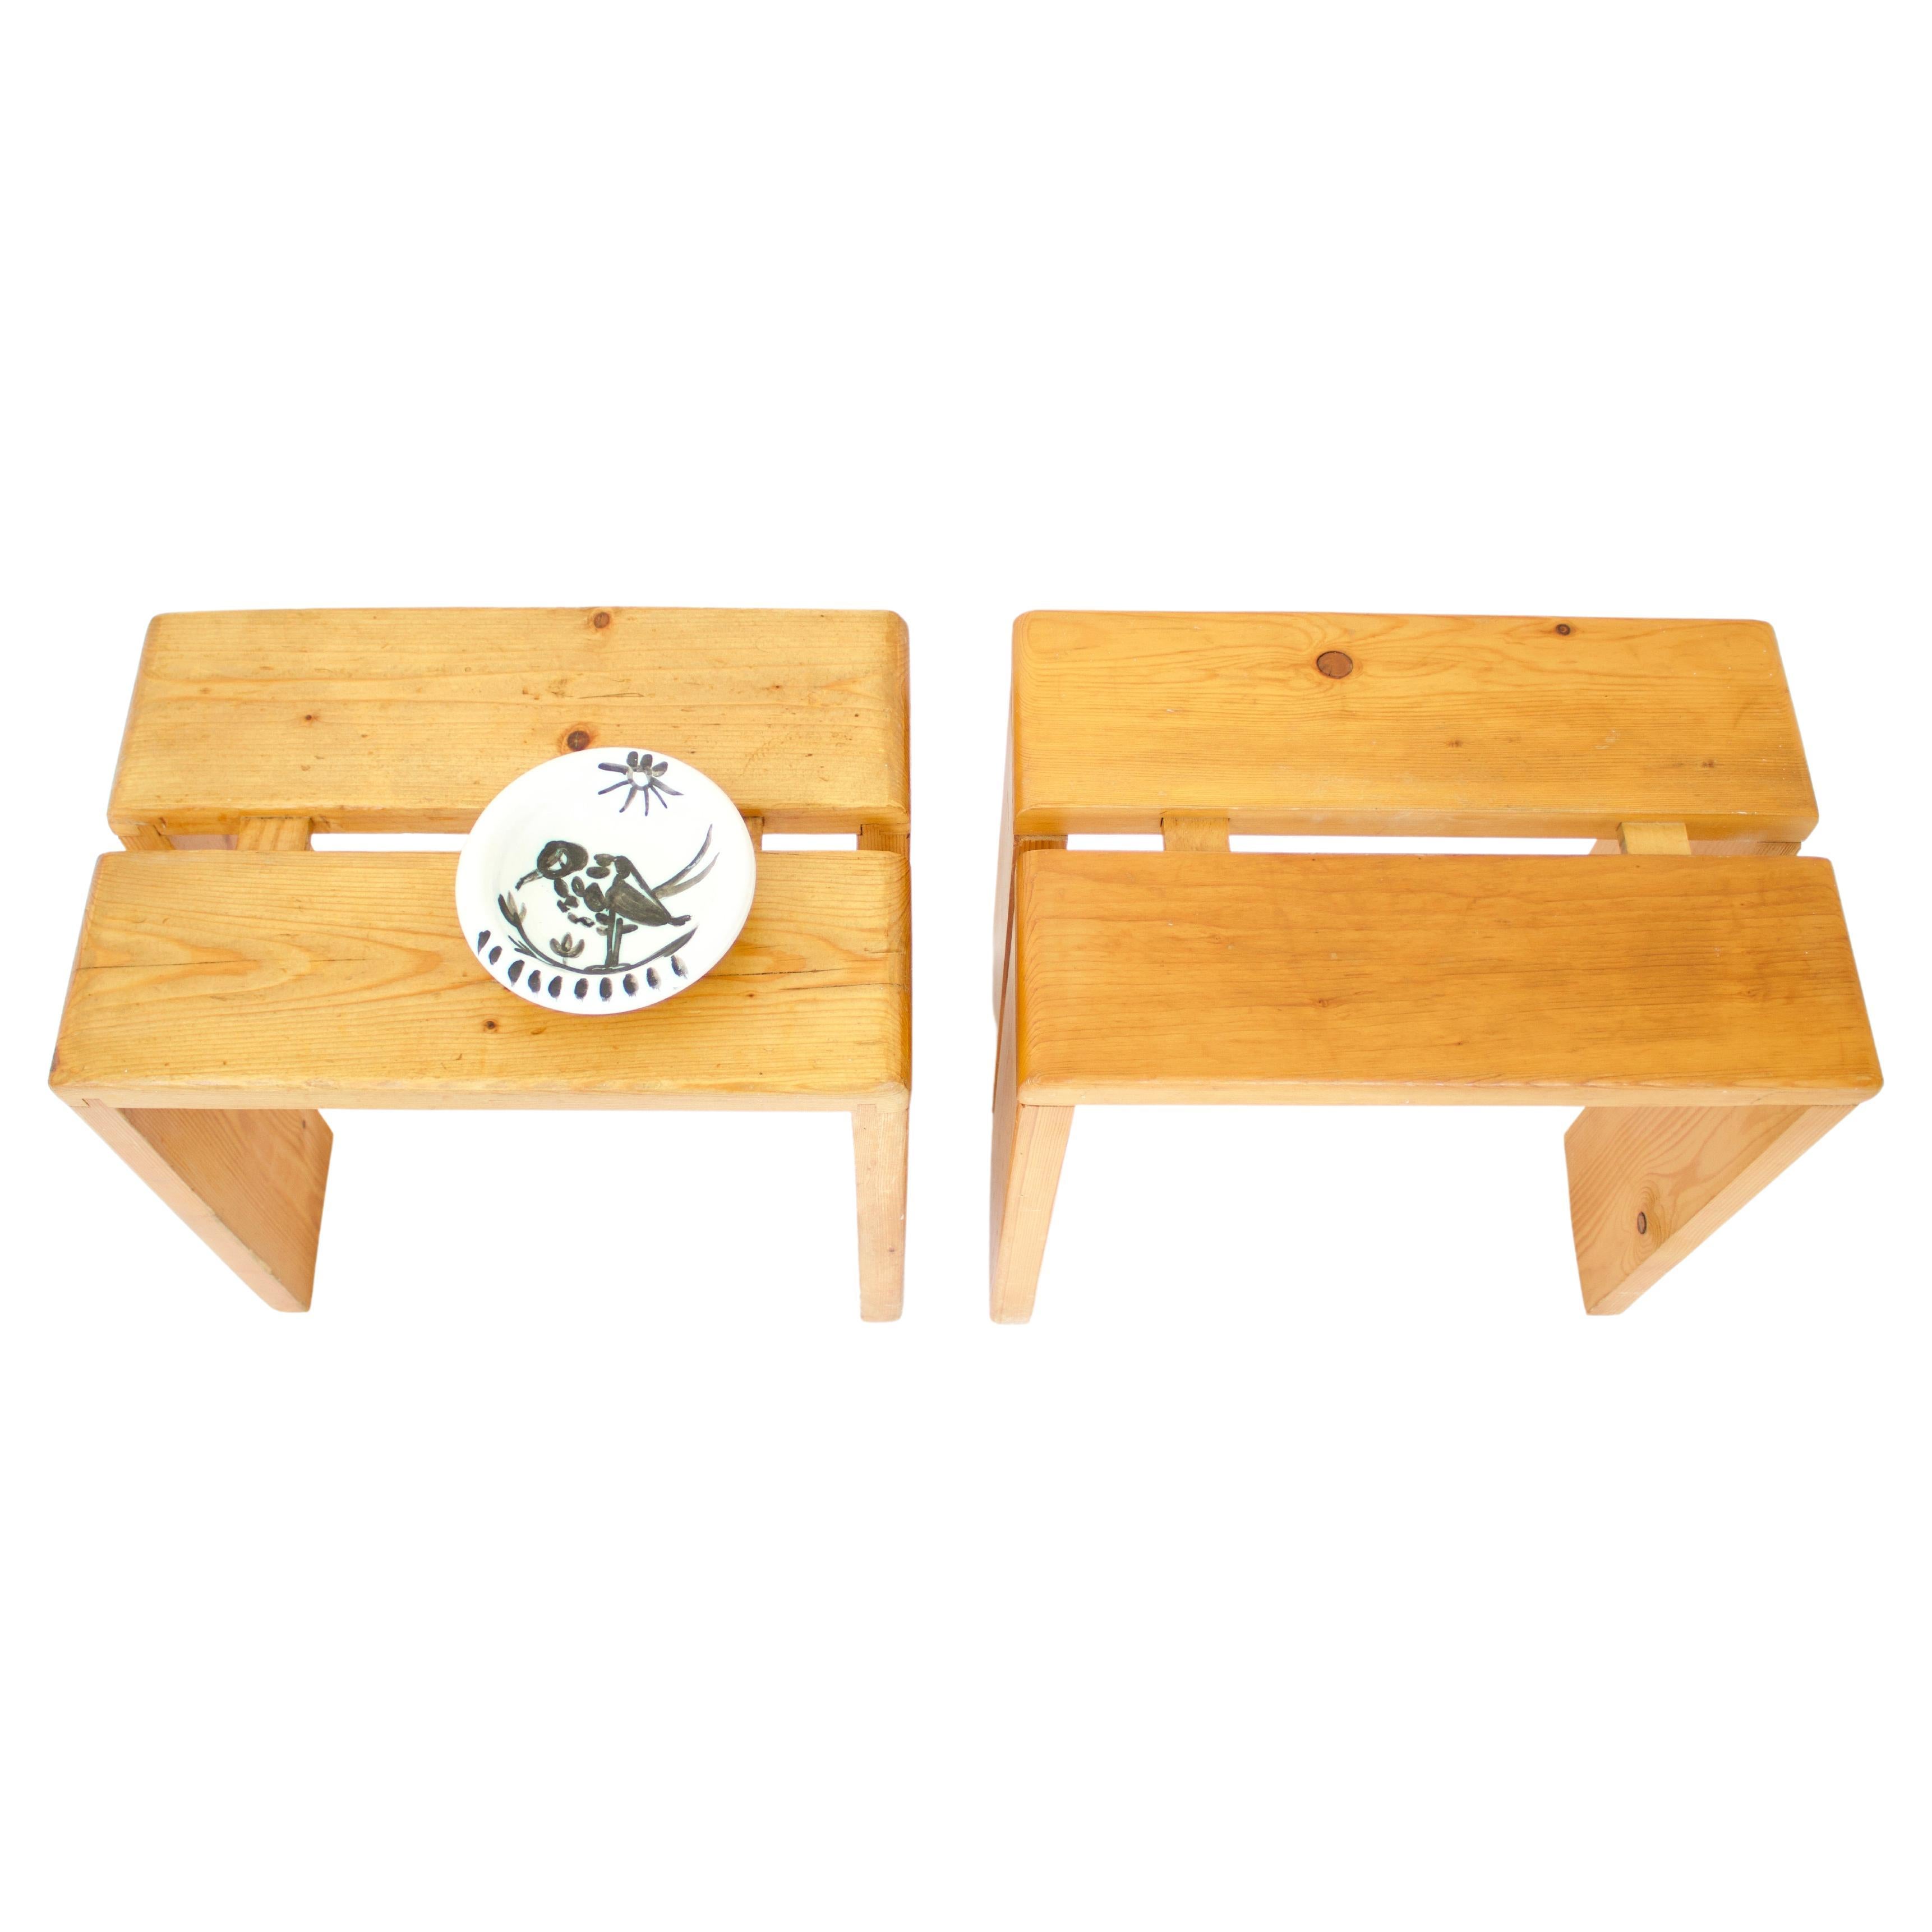 French Charlotte Perriand Pine Wood Stools for Les Arcs Ski Resort, France, circa 1960 For Sale